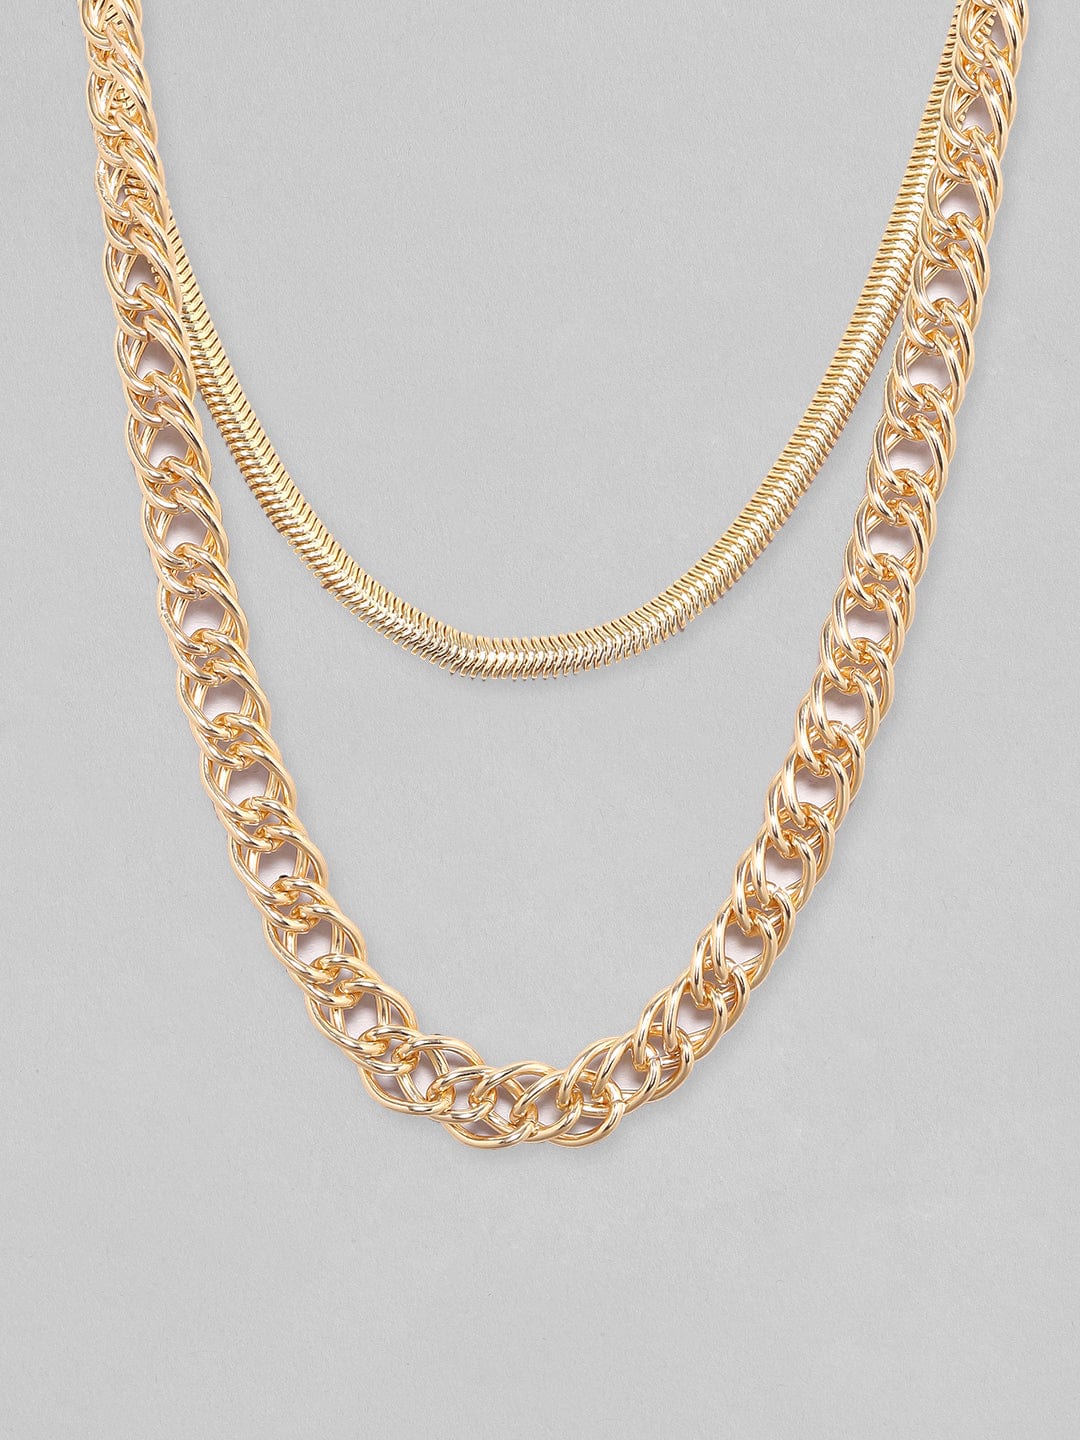 Snake Chain Paperclip Necklace, Gold Double Chain Necklaces with 18K Gold  Plated Vermeil on Sterling Silver | MaiaMina